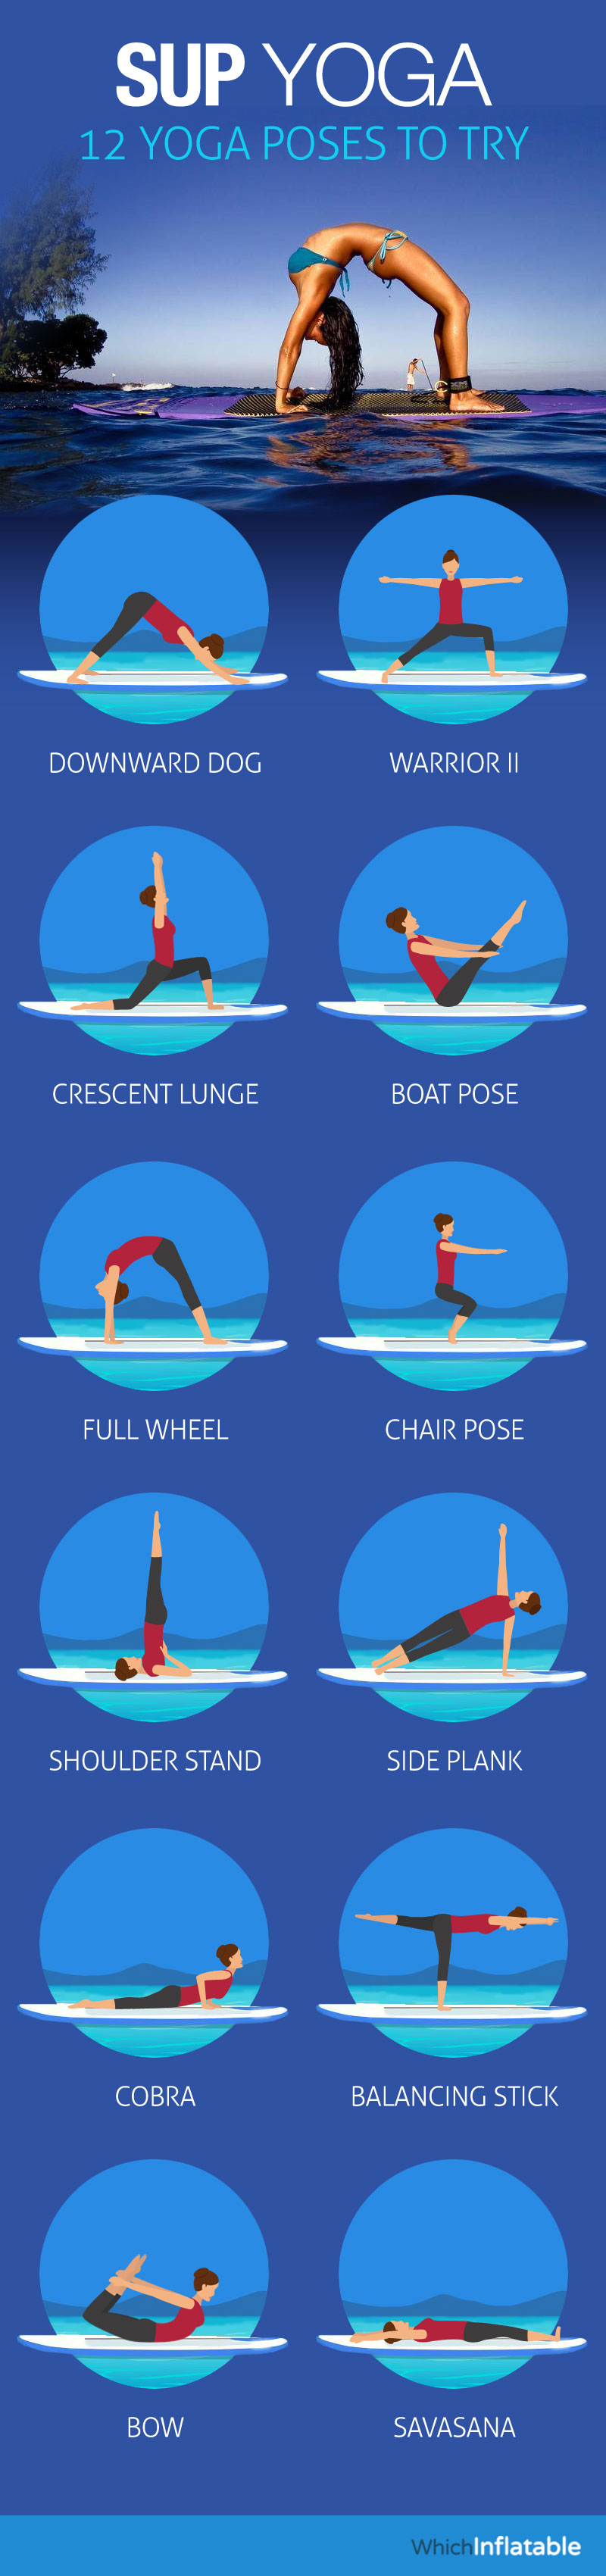 SUP Yoga Exercise Infographic